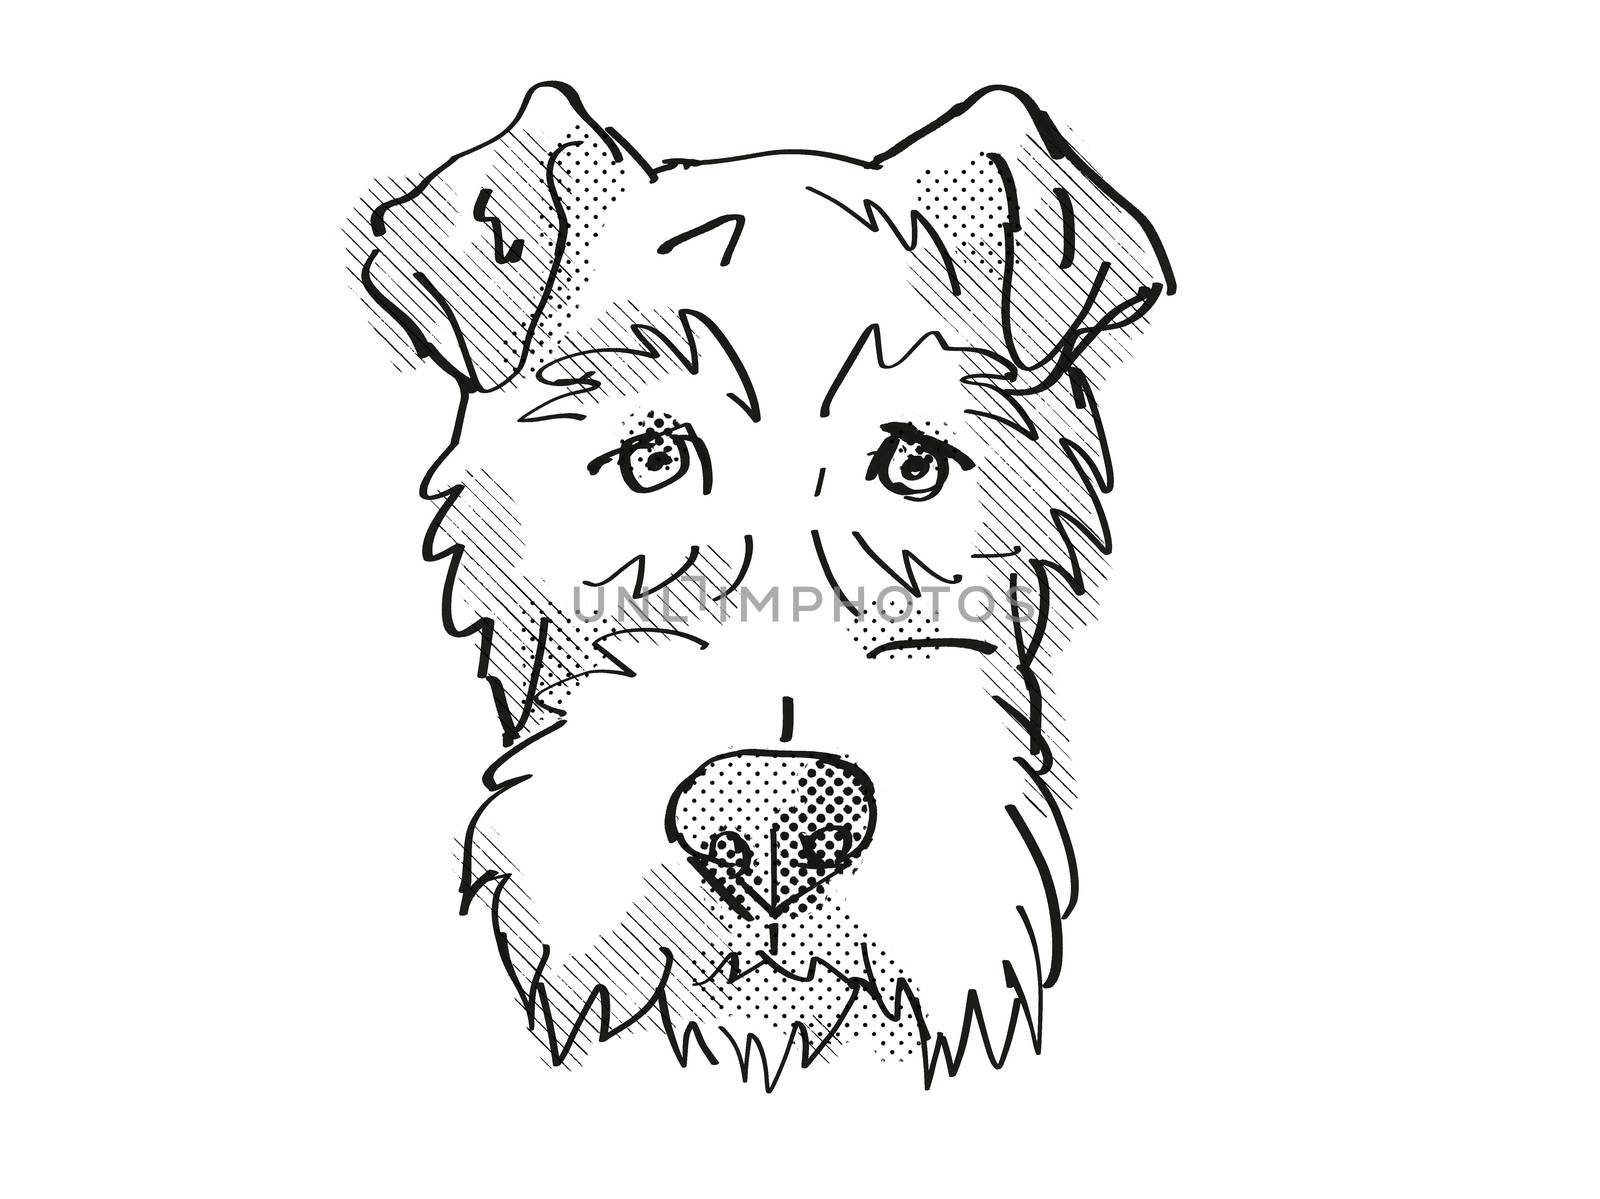 Retro cartoon style drawing of head of a Fox Terrier, a domestic dog or canine breed on isolated white background done in black and white.